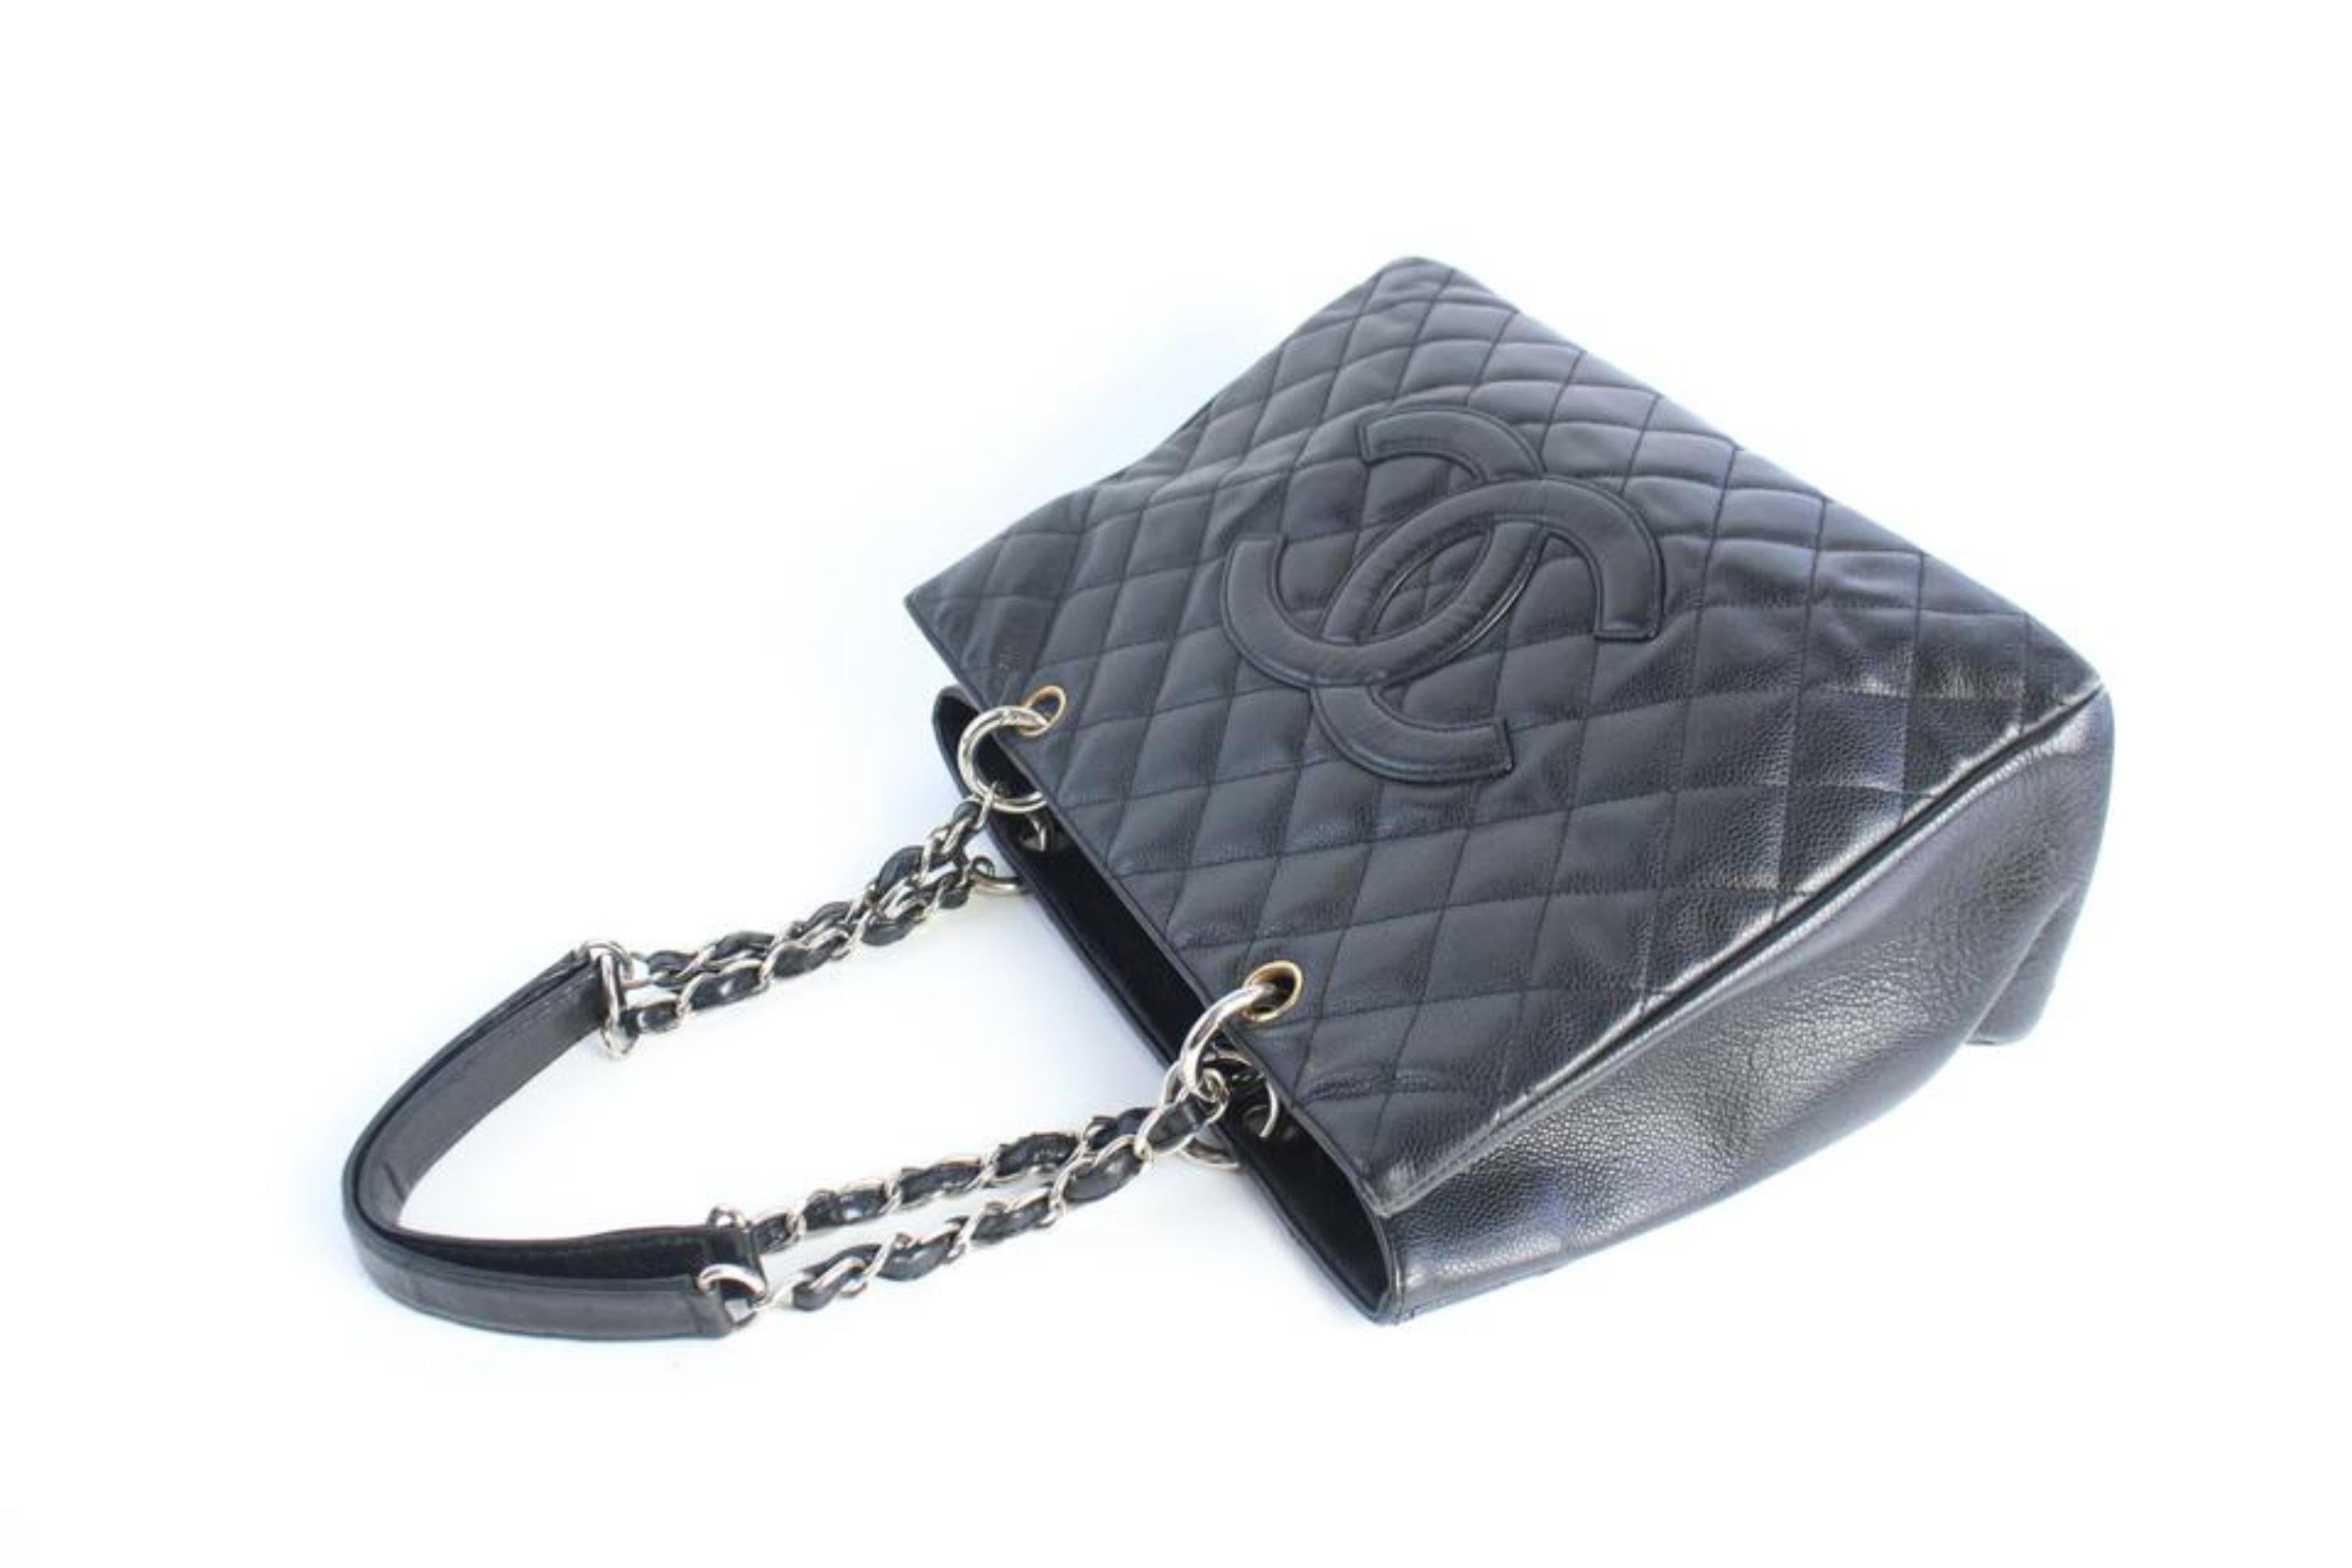 Chanel Shopping Tote Quilted Gst 17cz0828 Black Leather Shoulder Bag For Sale 2